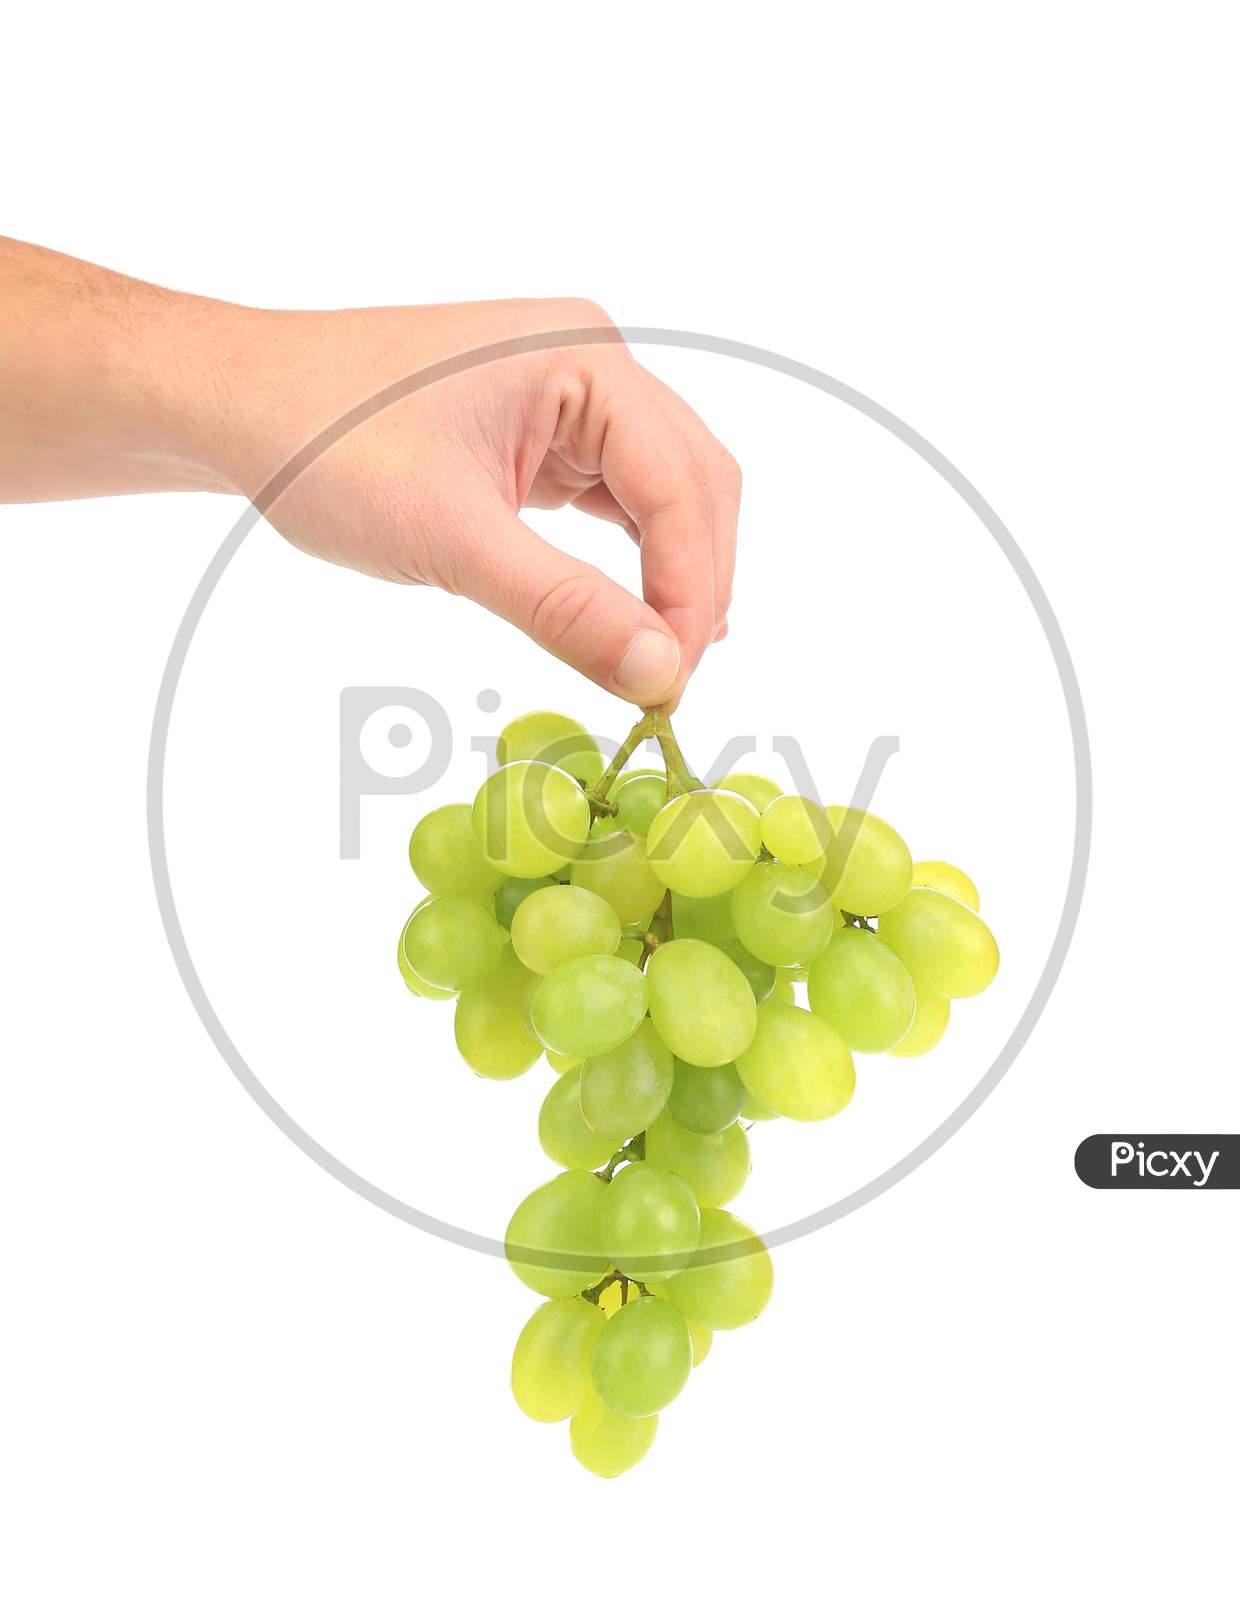 Branch Of Green Ripe Grapes In Hand. Isolated On A White Background.